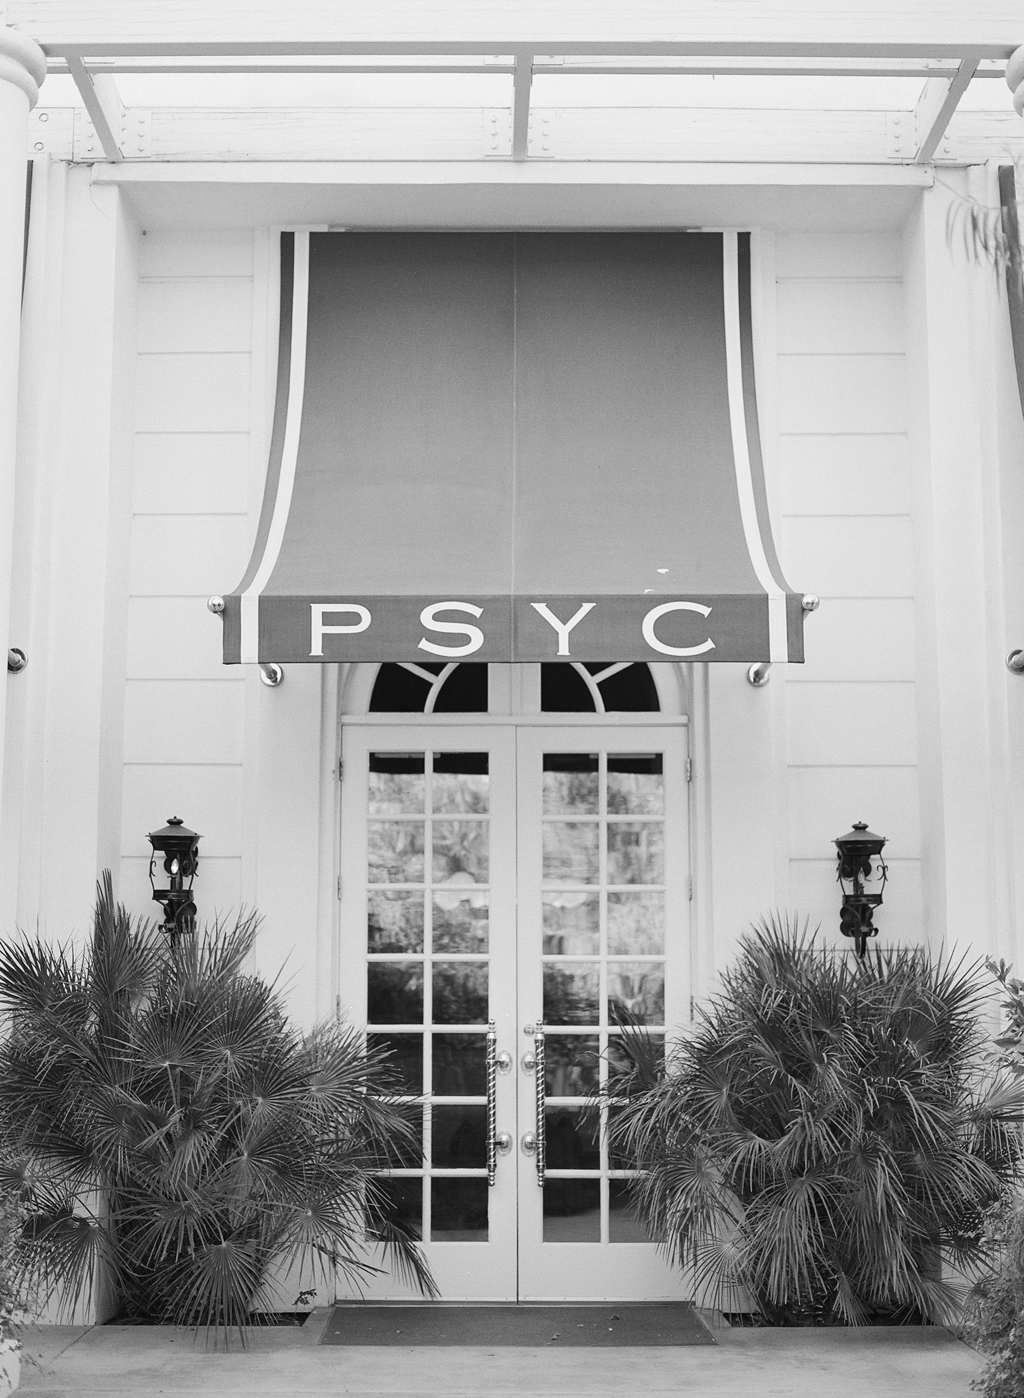 Palm Springs Yacht Club, PSYC, at the Parker Palm Springs.